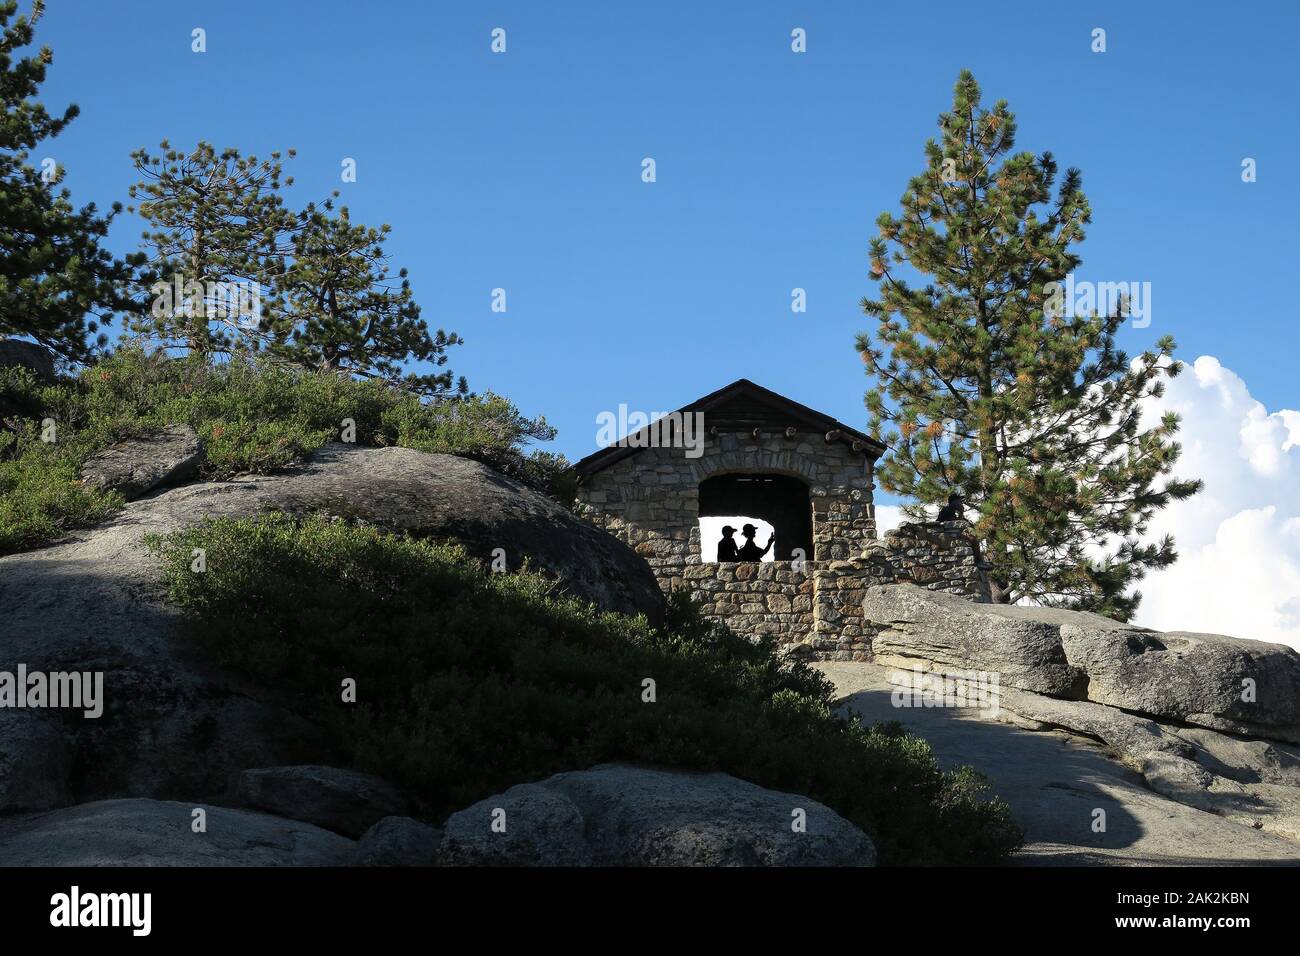 Viewpoint Structure With Tourist Silhouettes at Glacier Point, Yosemite Stock Photo